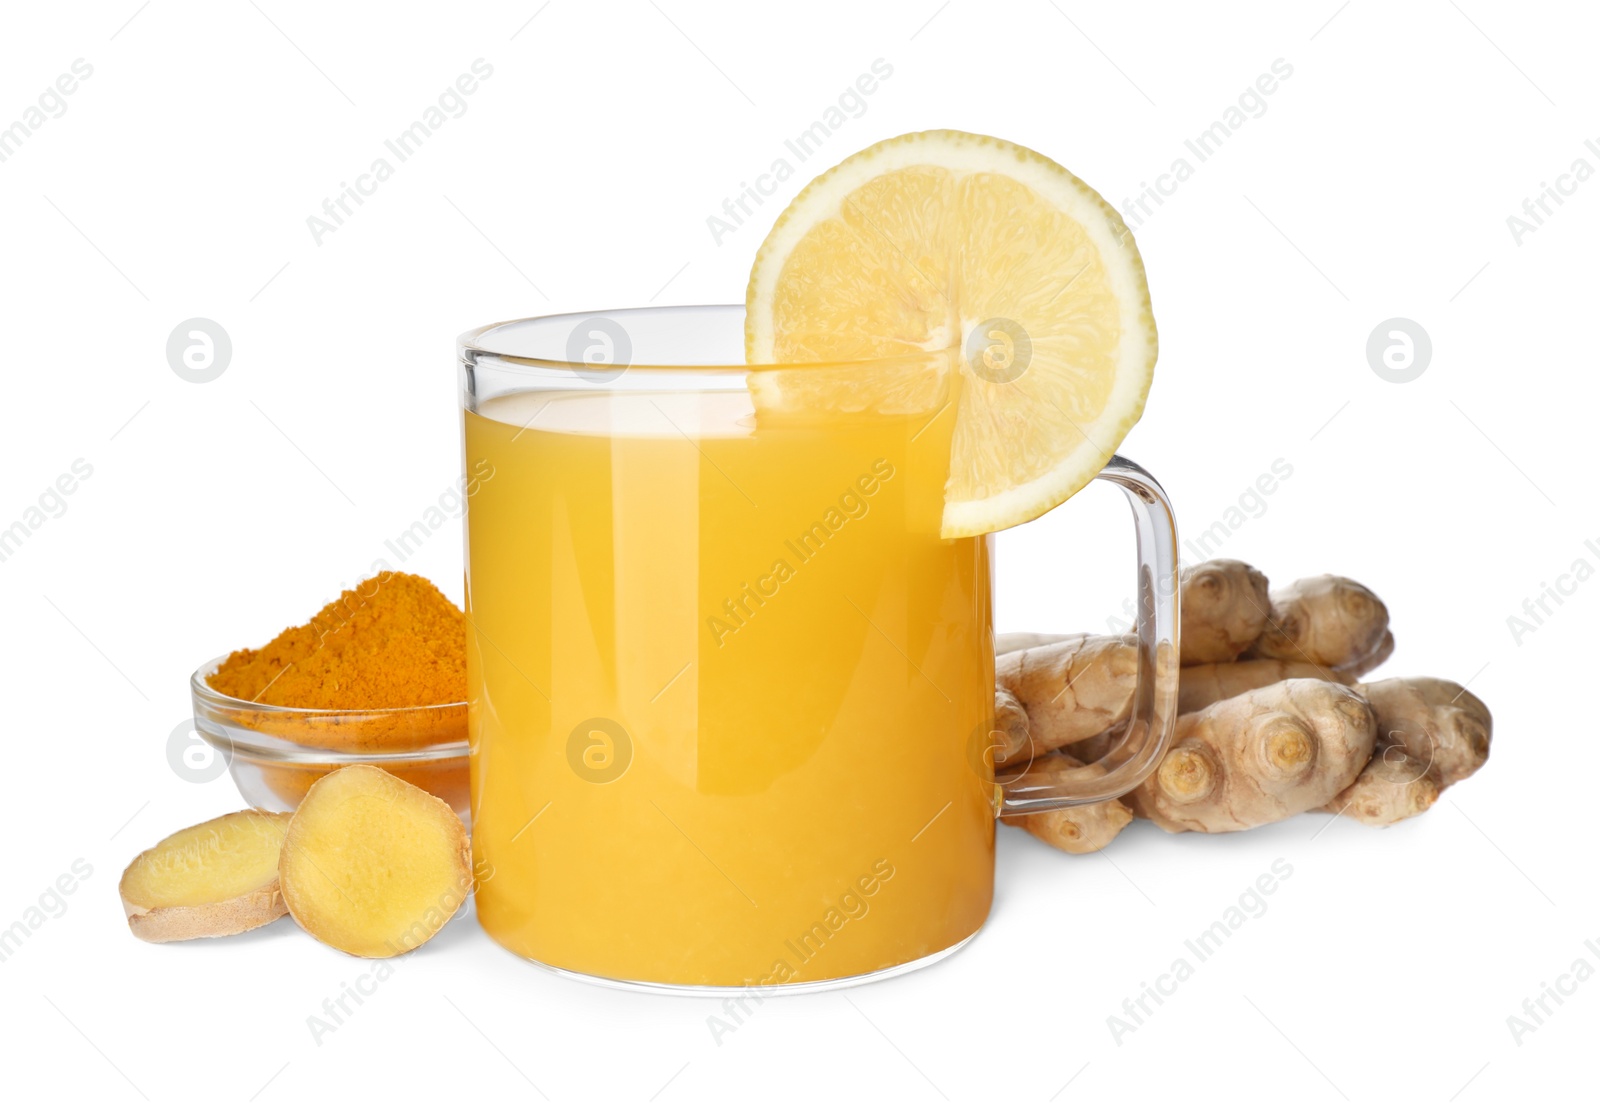 Photo of Immunity boosting drink with lemon, ginger and turmeric on white background